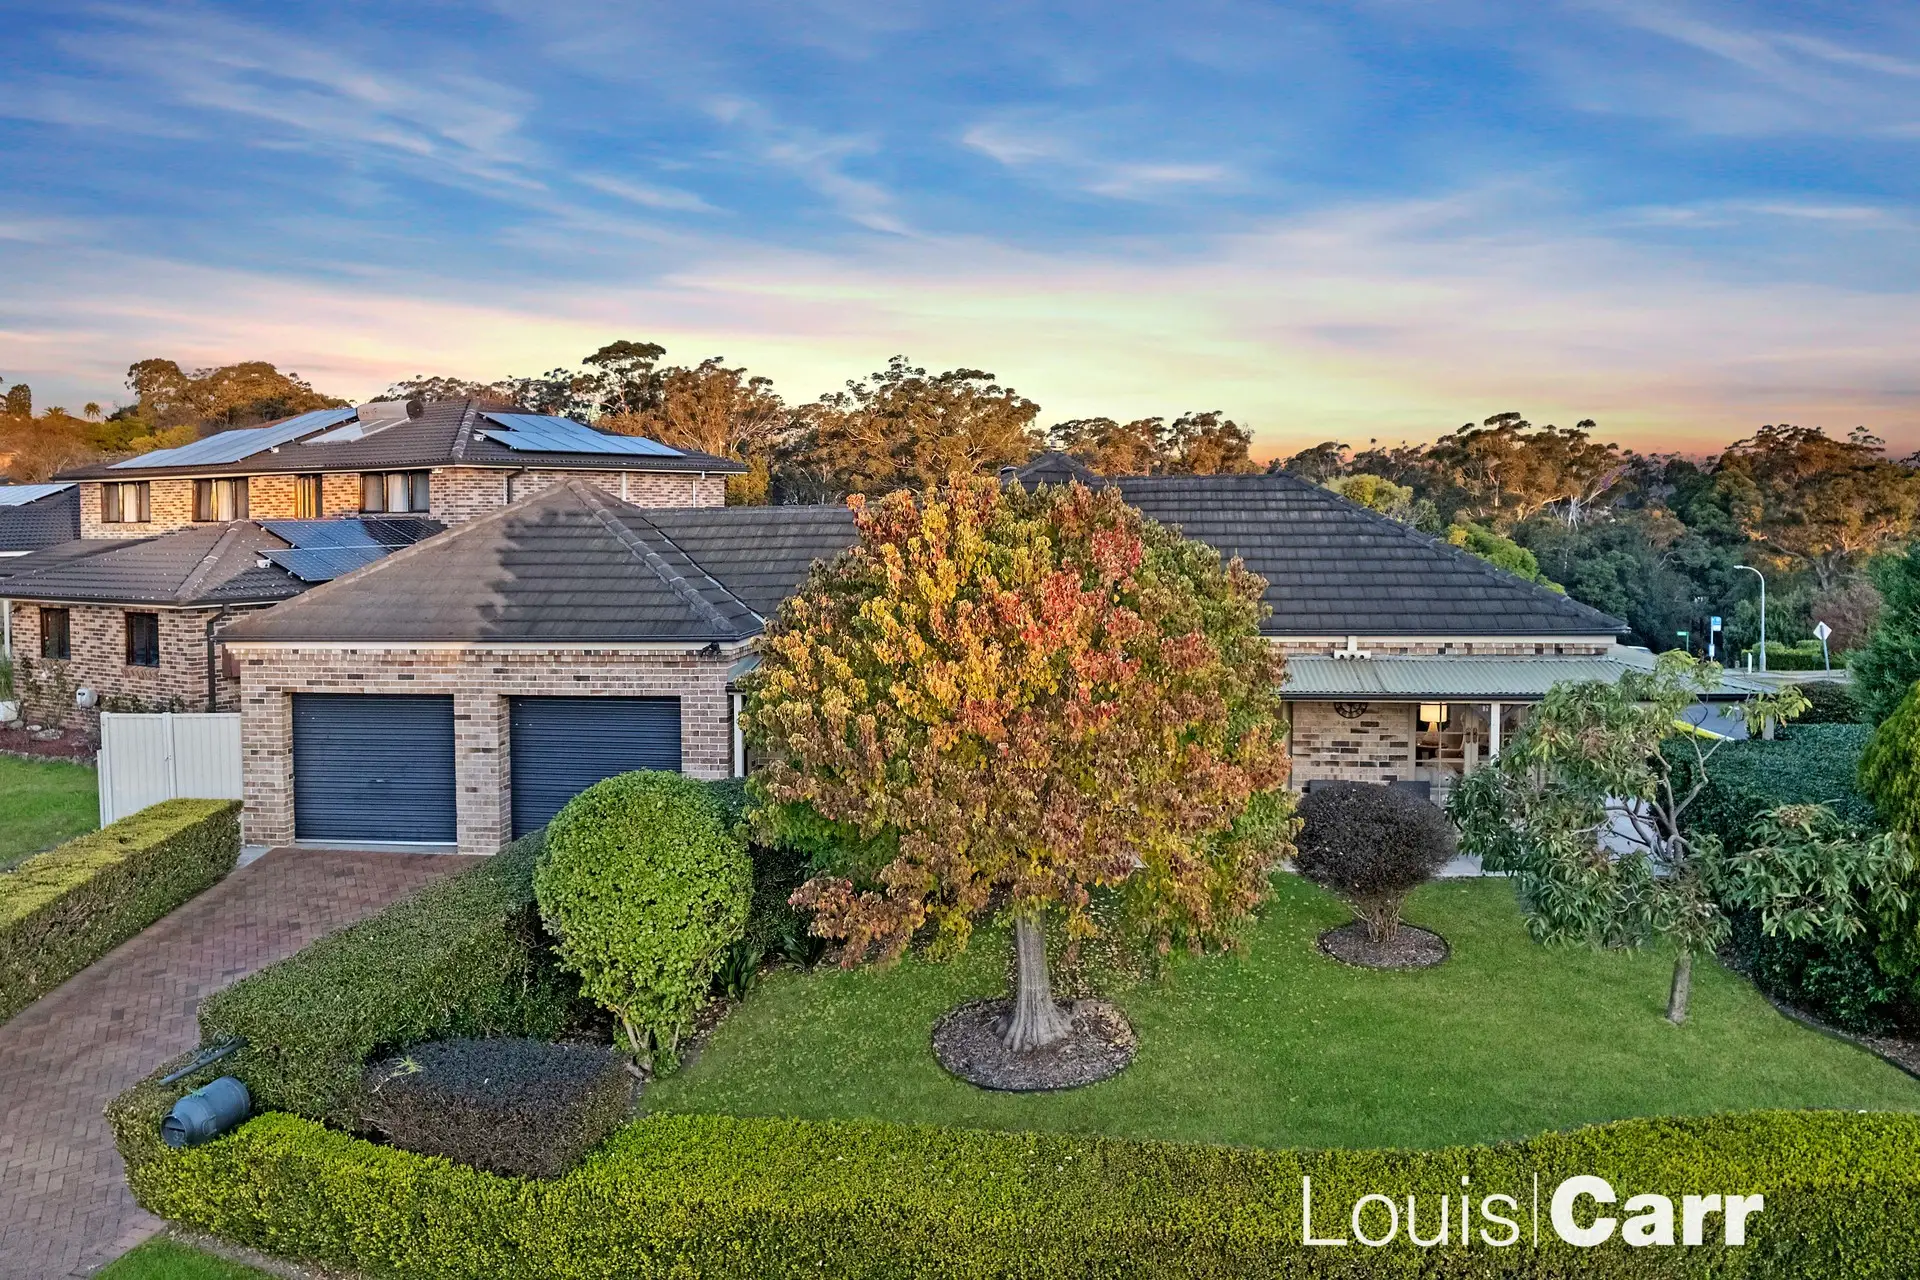 Photo #17: 32 Fullers Road, Glenhaven - Sold by Louis Carr Real Estate